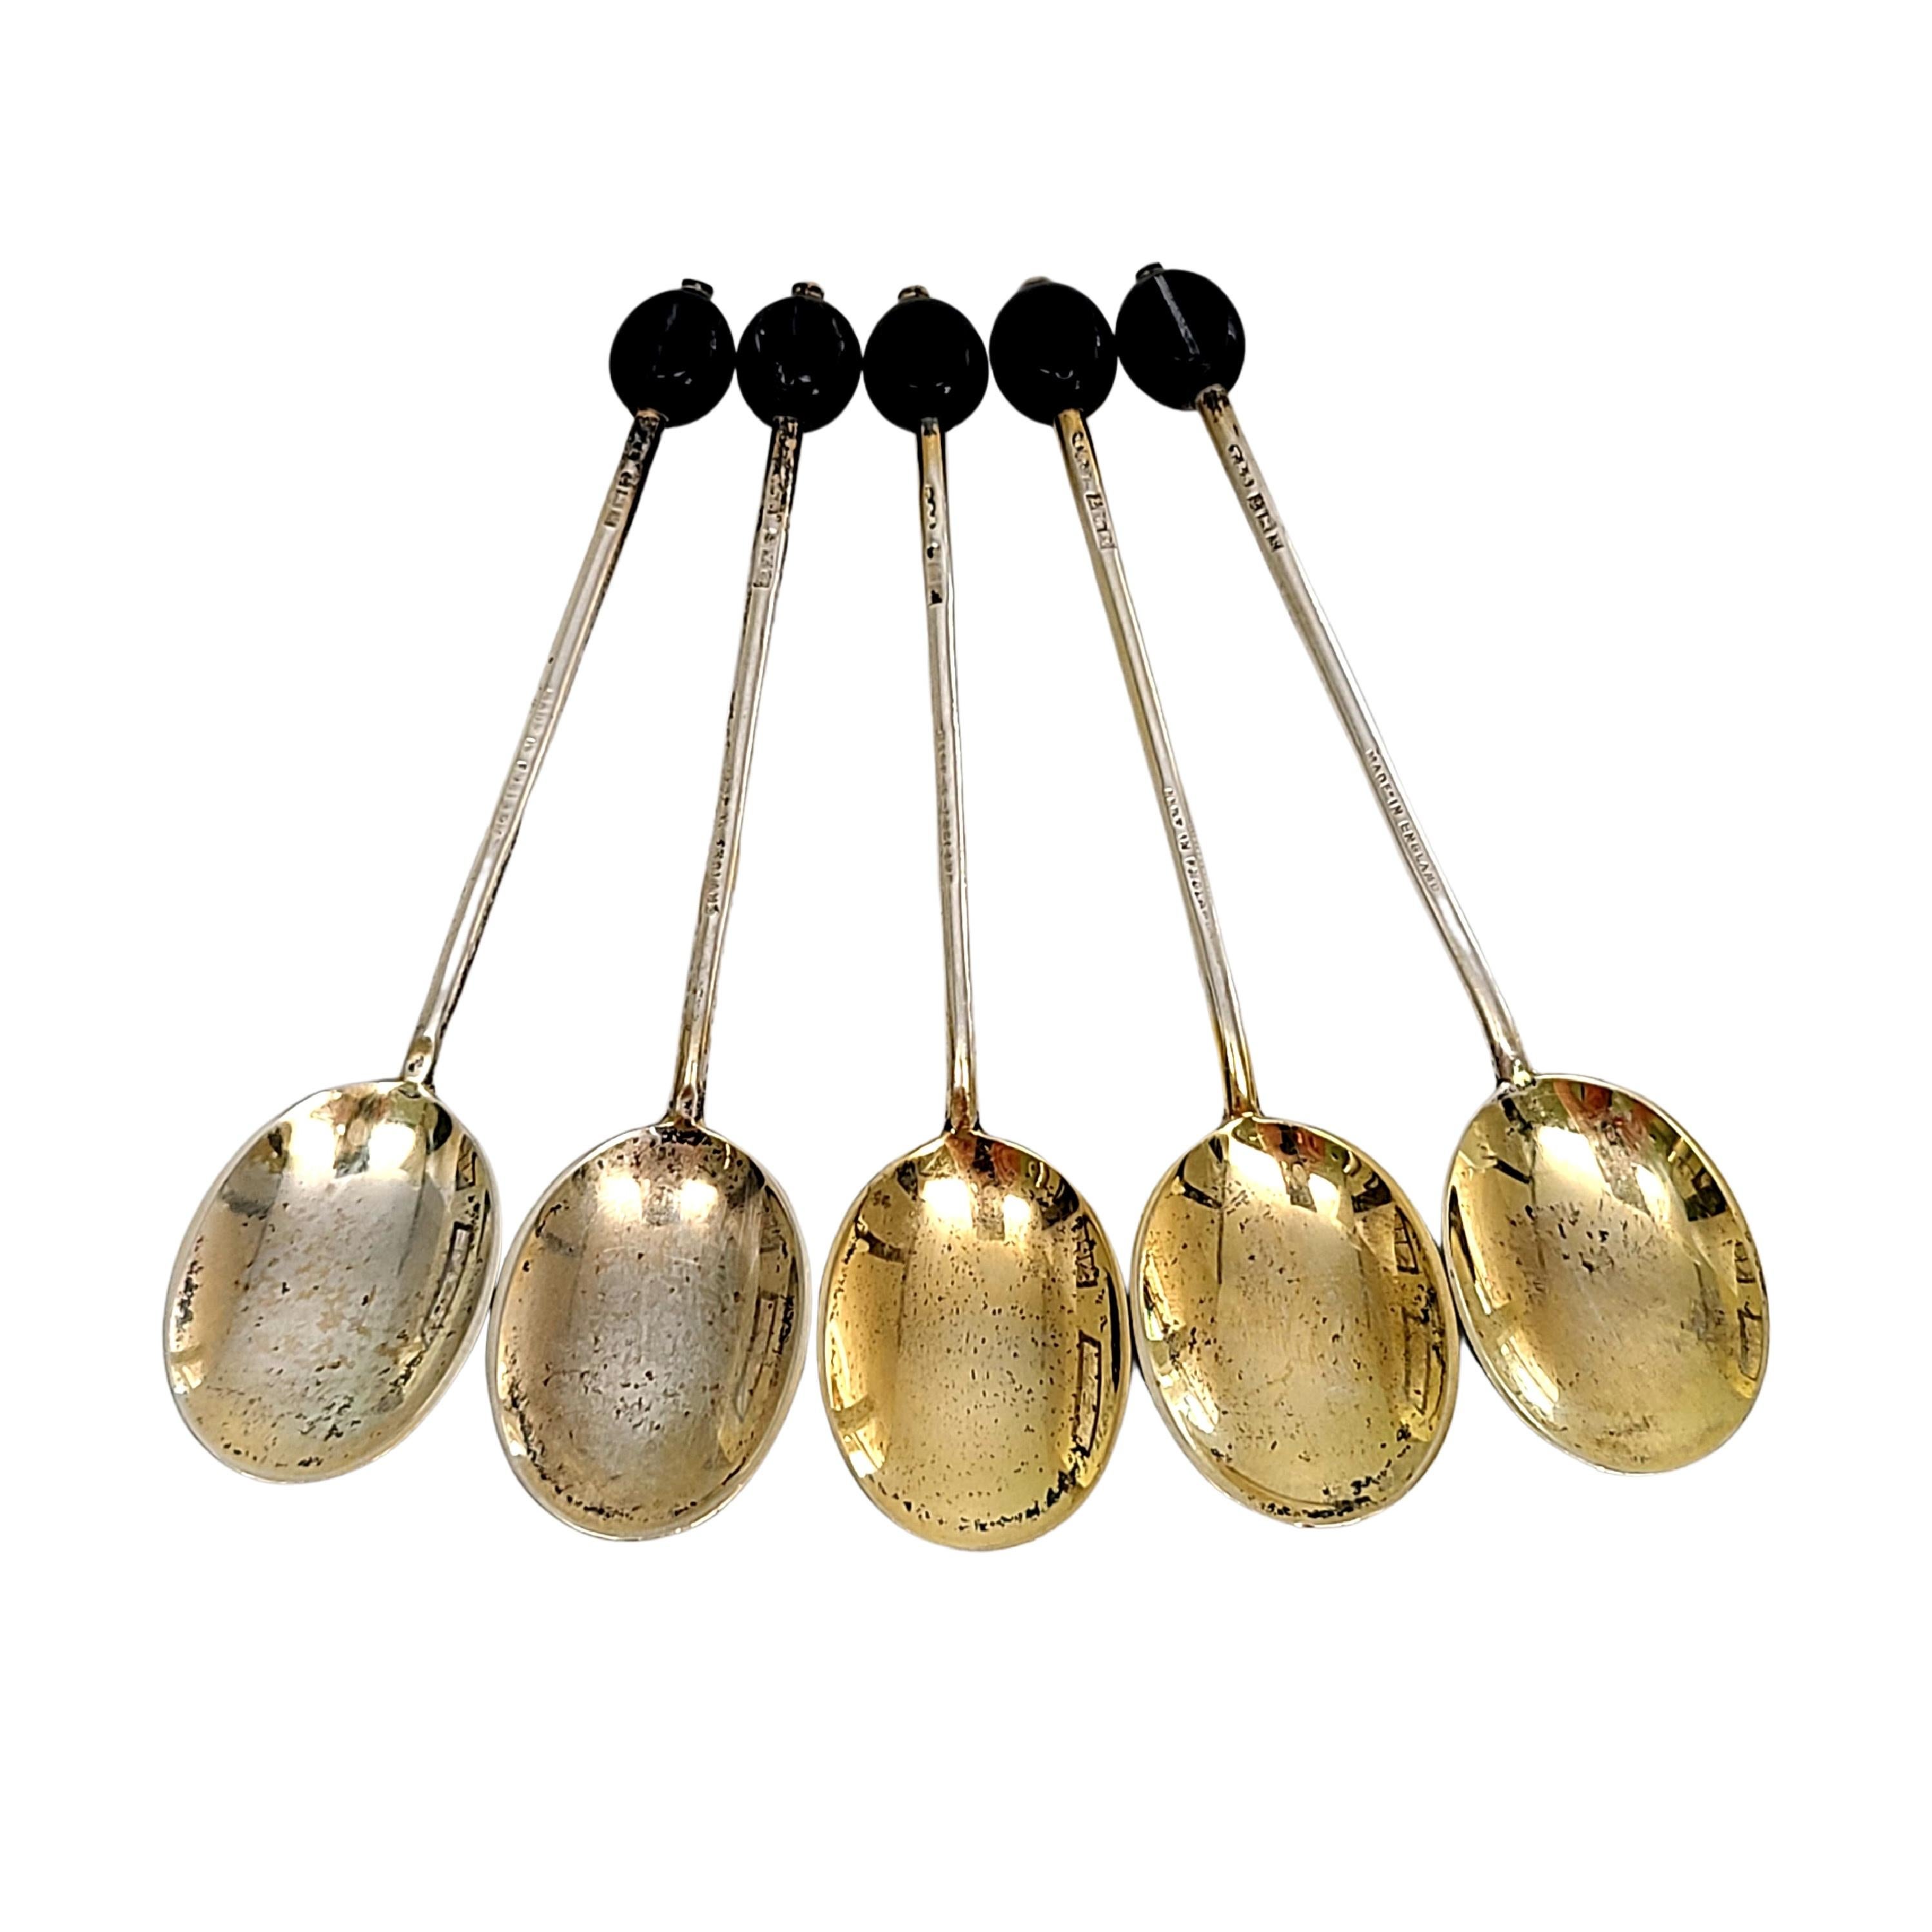 Set of 5 sterling silver and enamel demitasse spoons by Turner & Simpson of Birmingham, England, circa 1960's.

No monogram

Beautifully enameled in a different flower design on the back of each bowl. Espresso bean tops each handle. Spoon bowls have